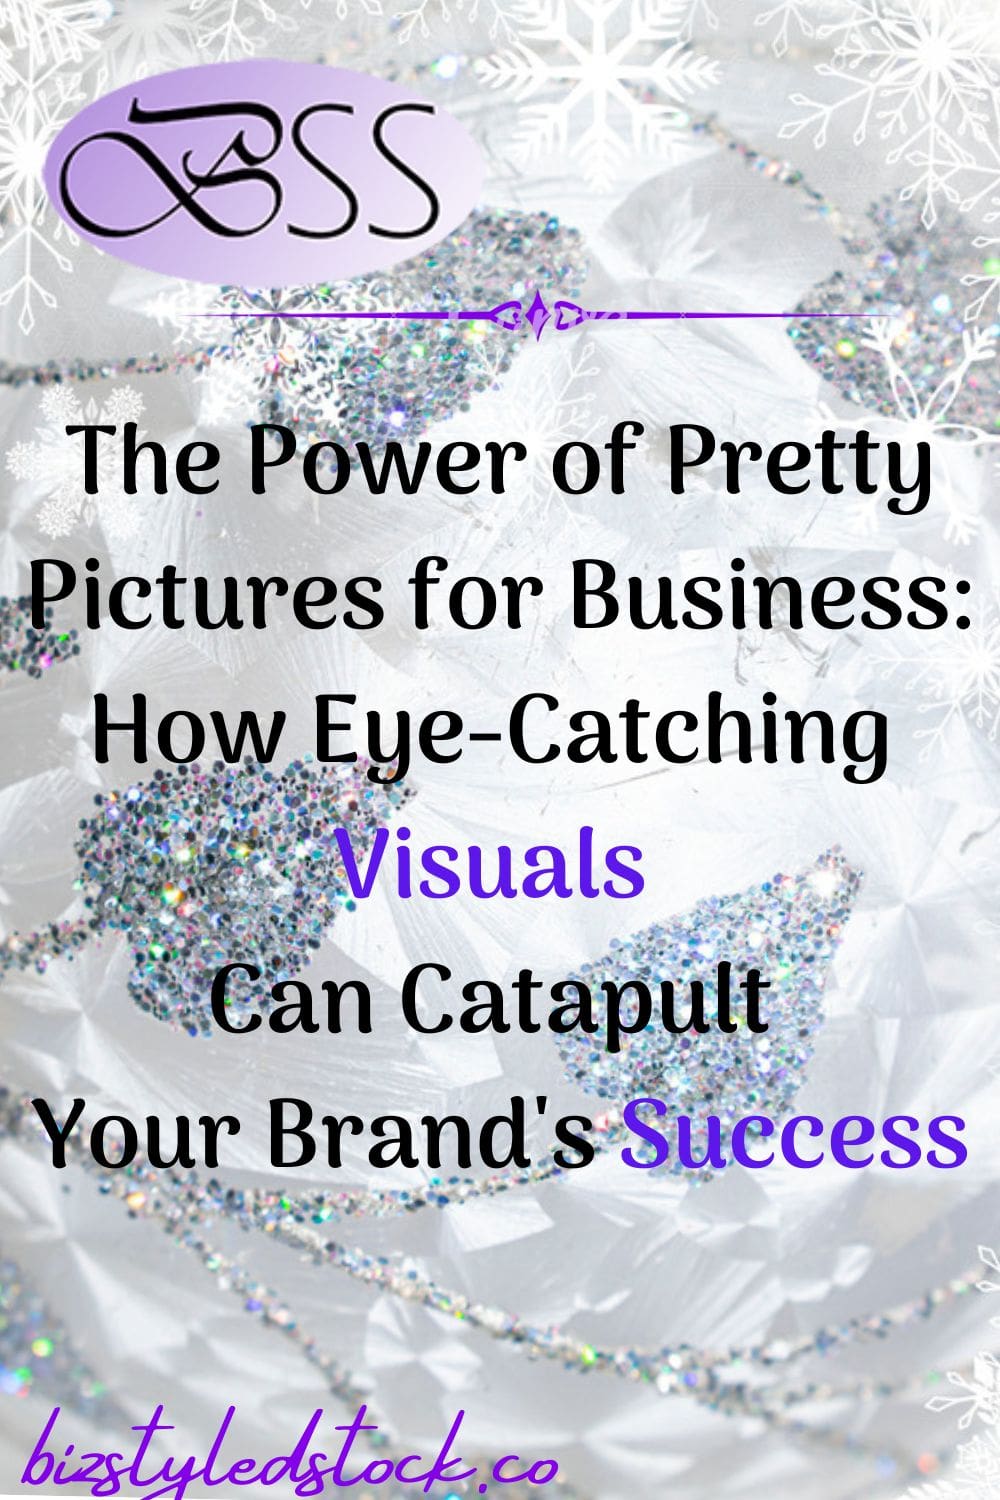 The Power of Pretty Pictures for Business How Eye-Catching Visuals Can Catapult Your Brand's Success pin.jpg